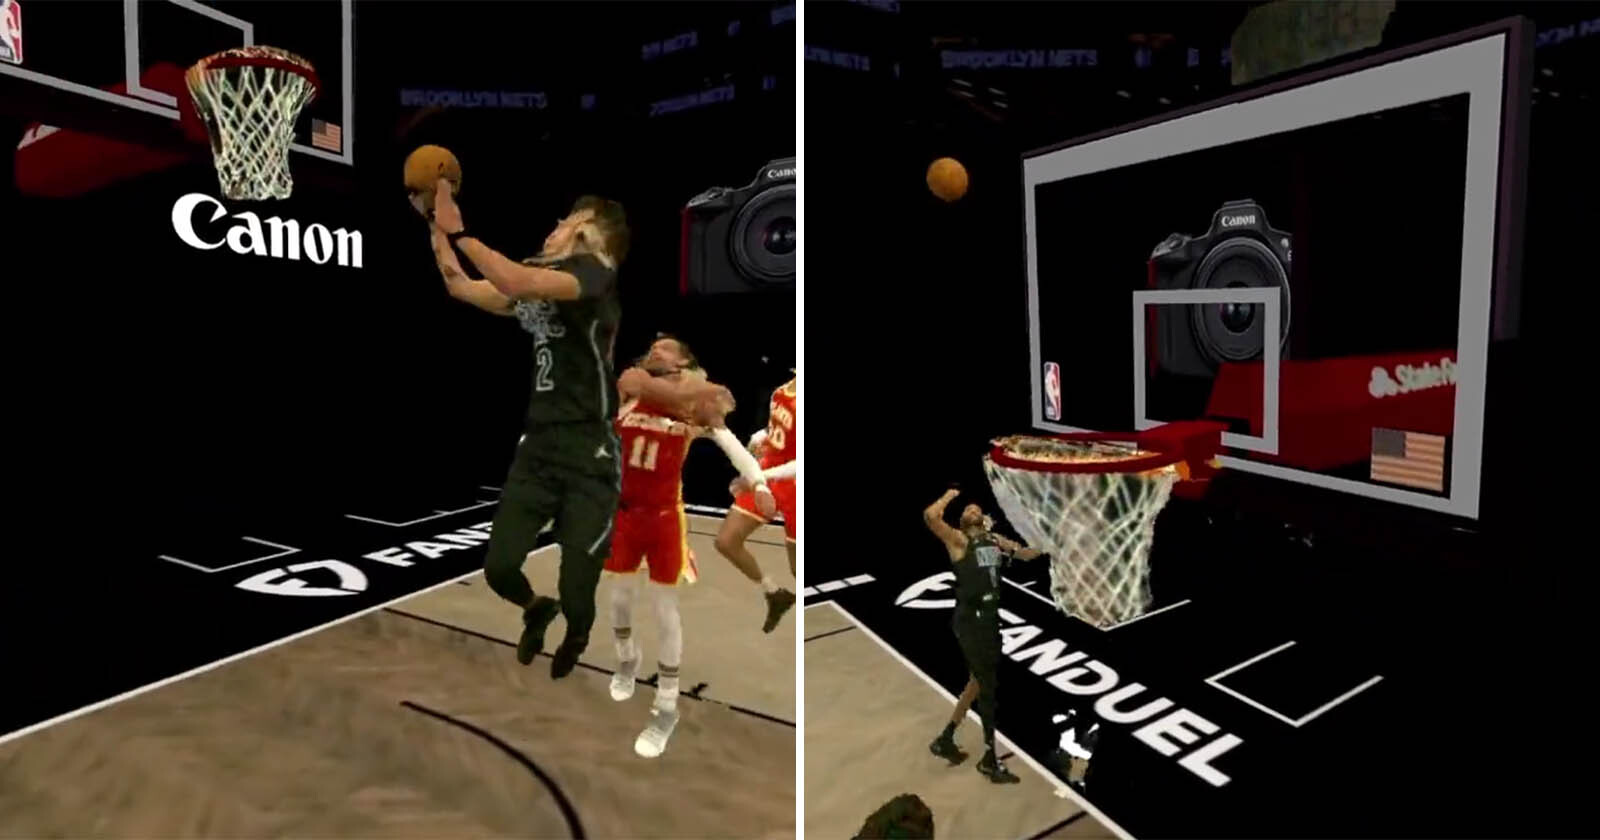 Canon and Brooklyn Nets Netaverse Offers a 3D VR NBA Experience